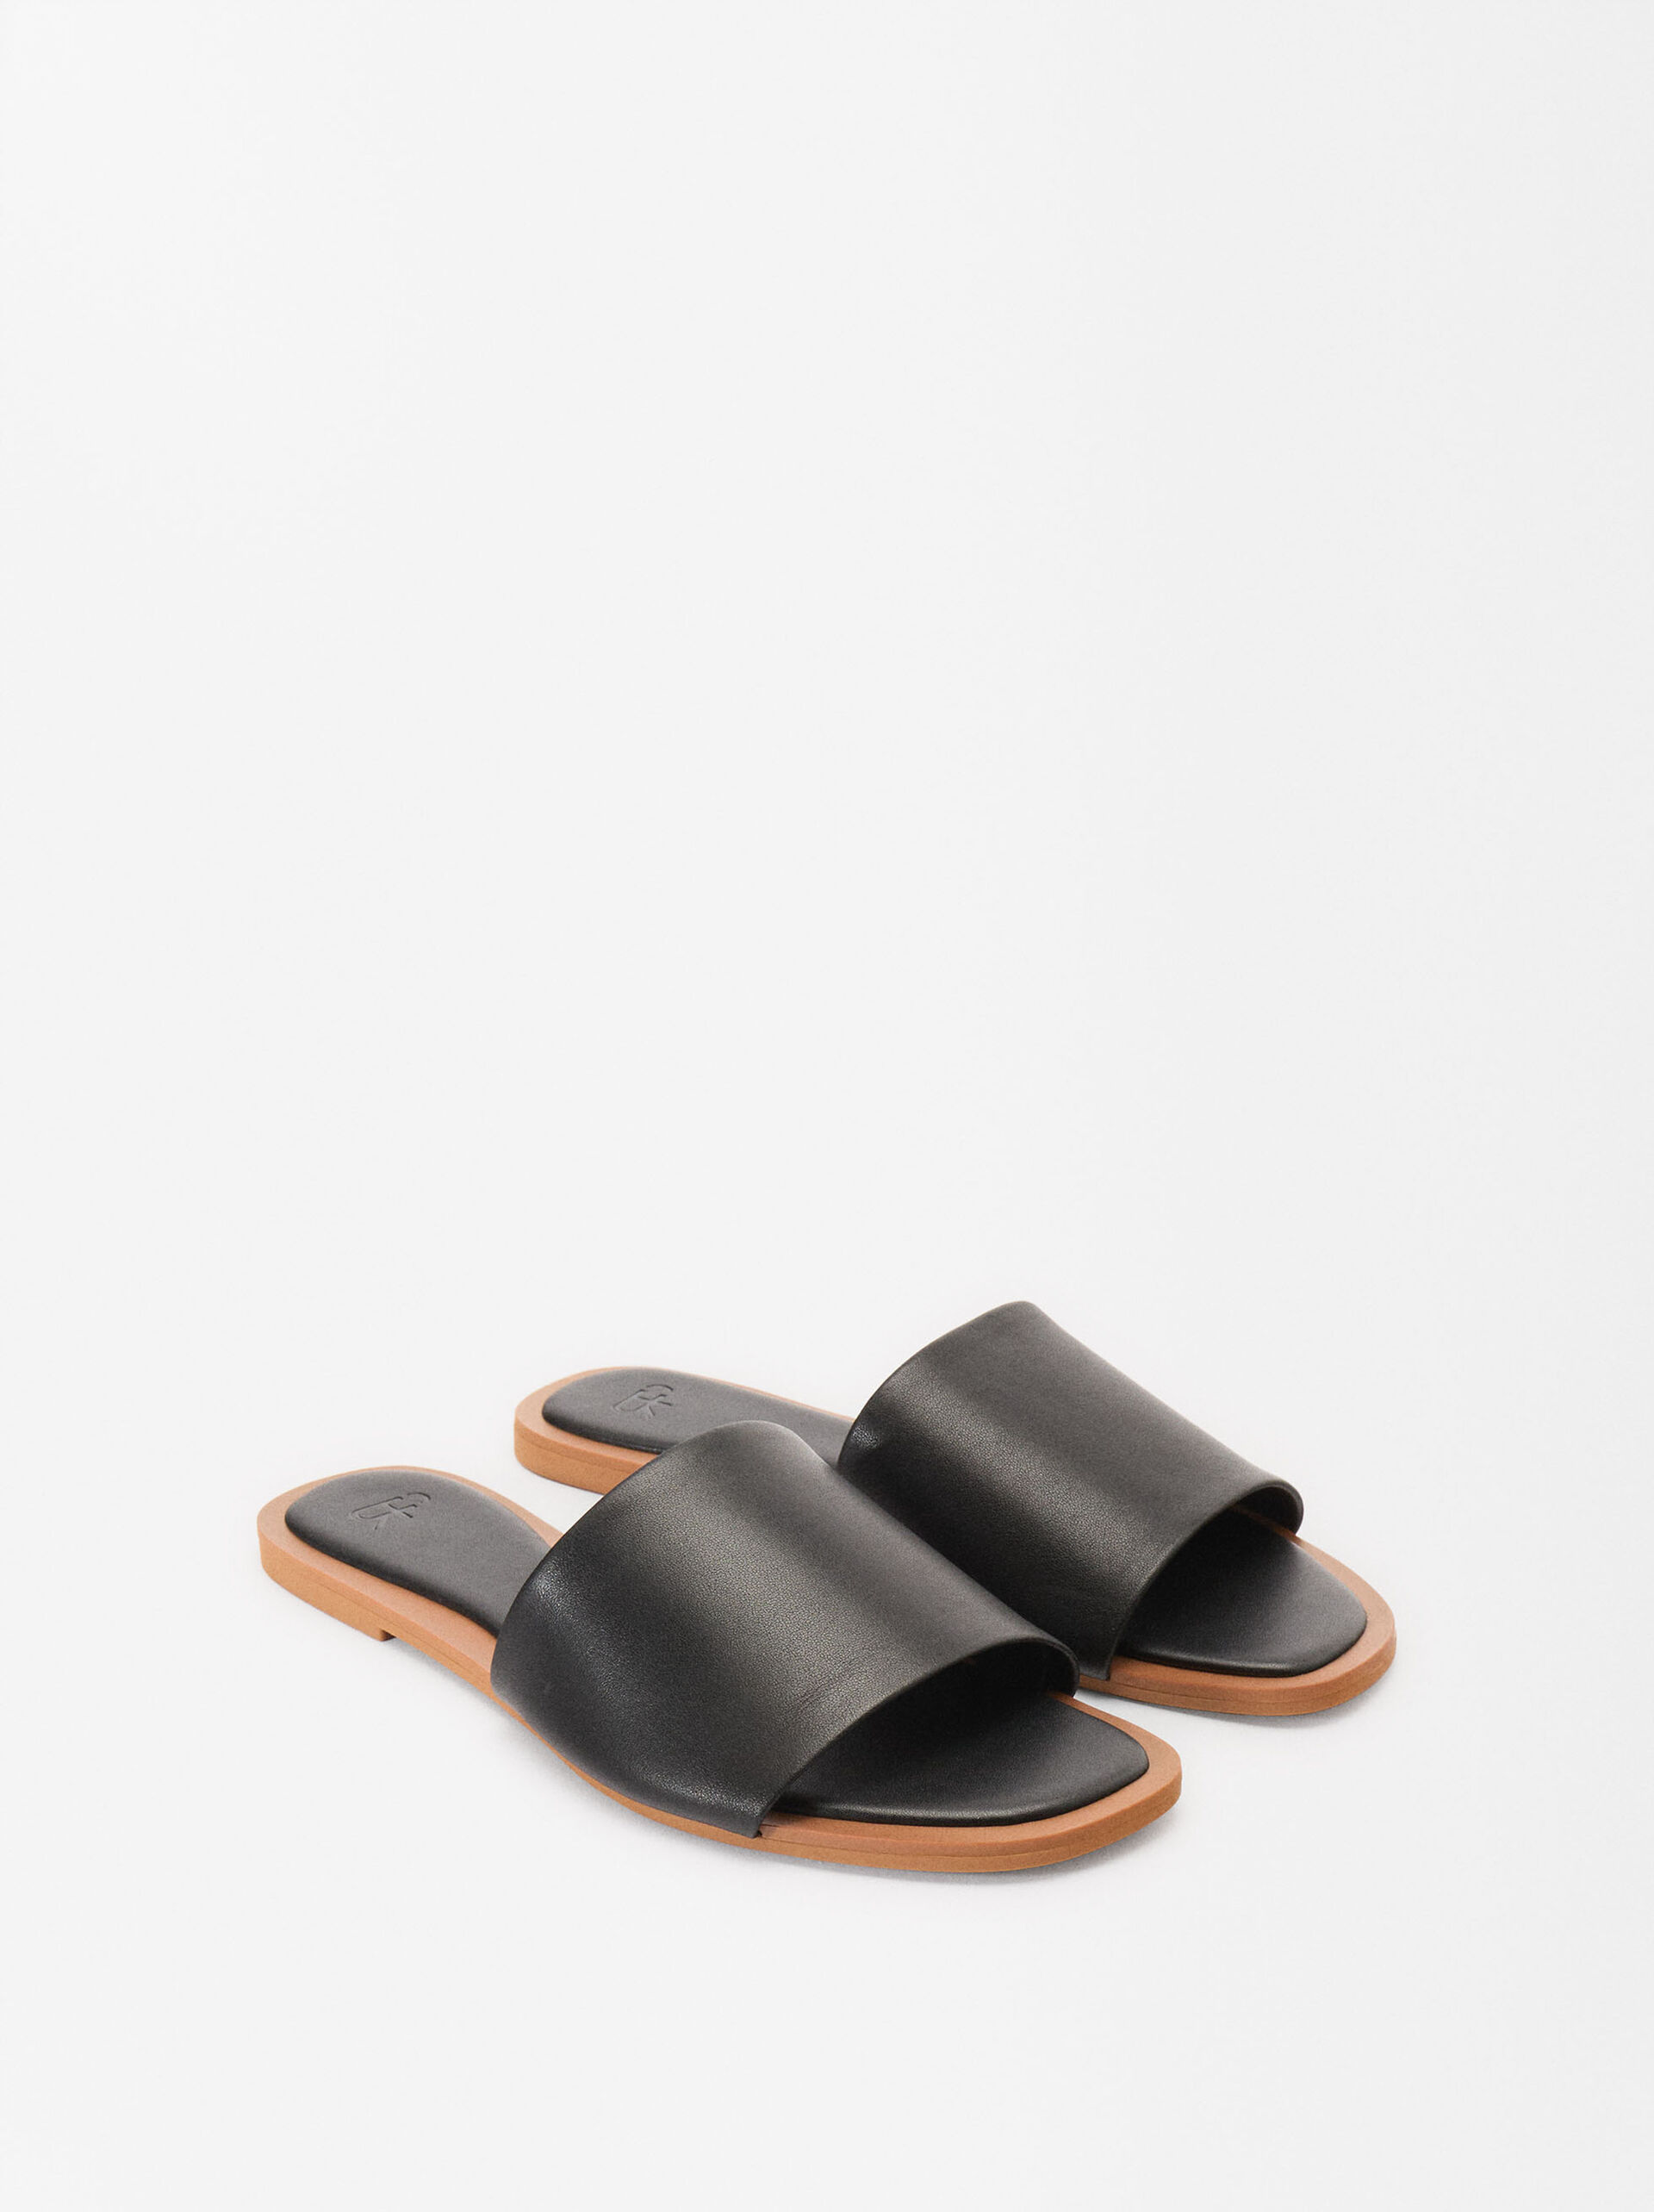 Napa Leather Sandals image number 2.0